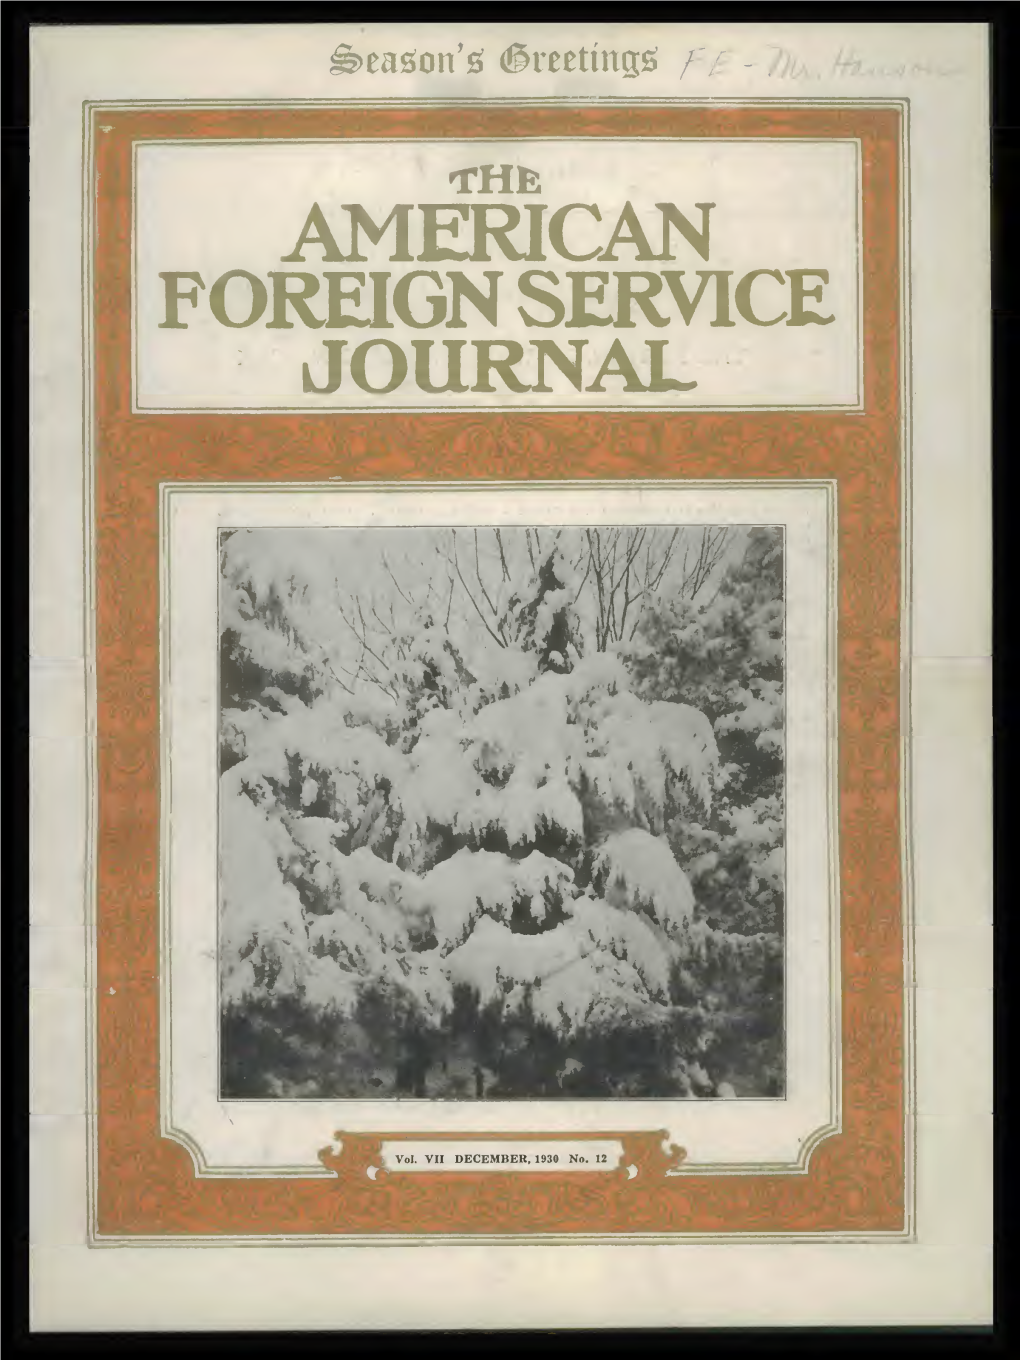 The Foreign Service Journal, December 1930